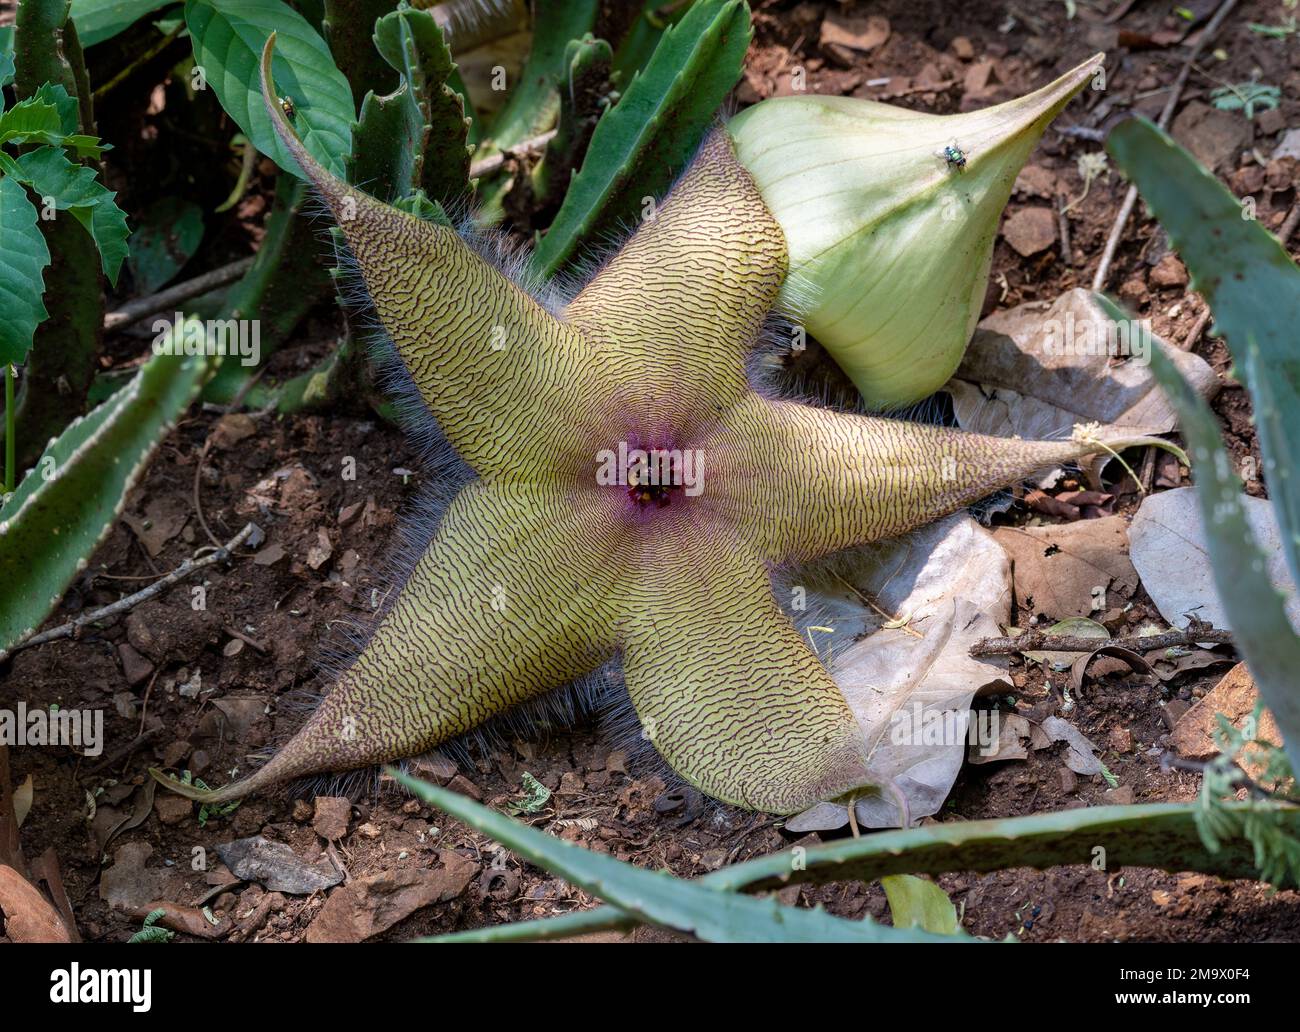 Flower of a Starfish Cactus (Stapelia gigantea), native to South Africa. Kruger National Park, South Africa. Stock Photo